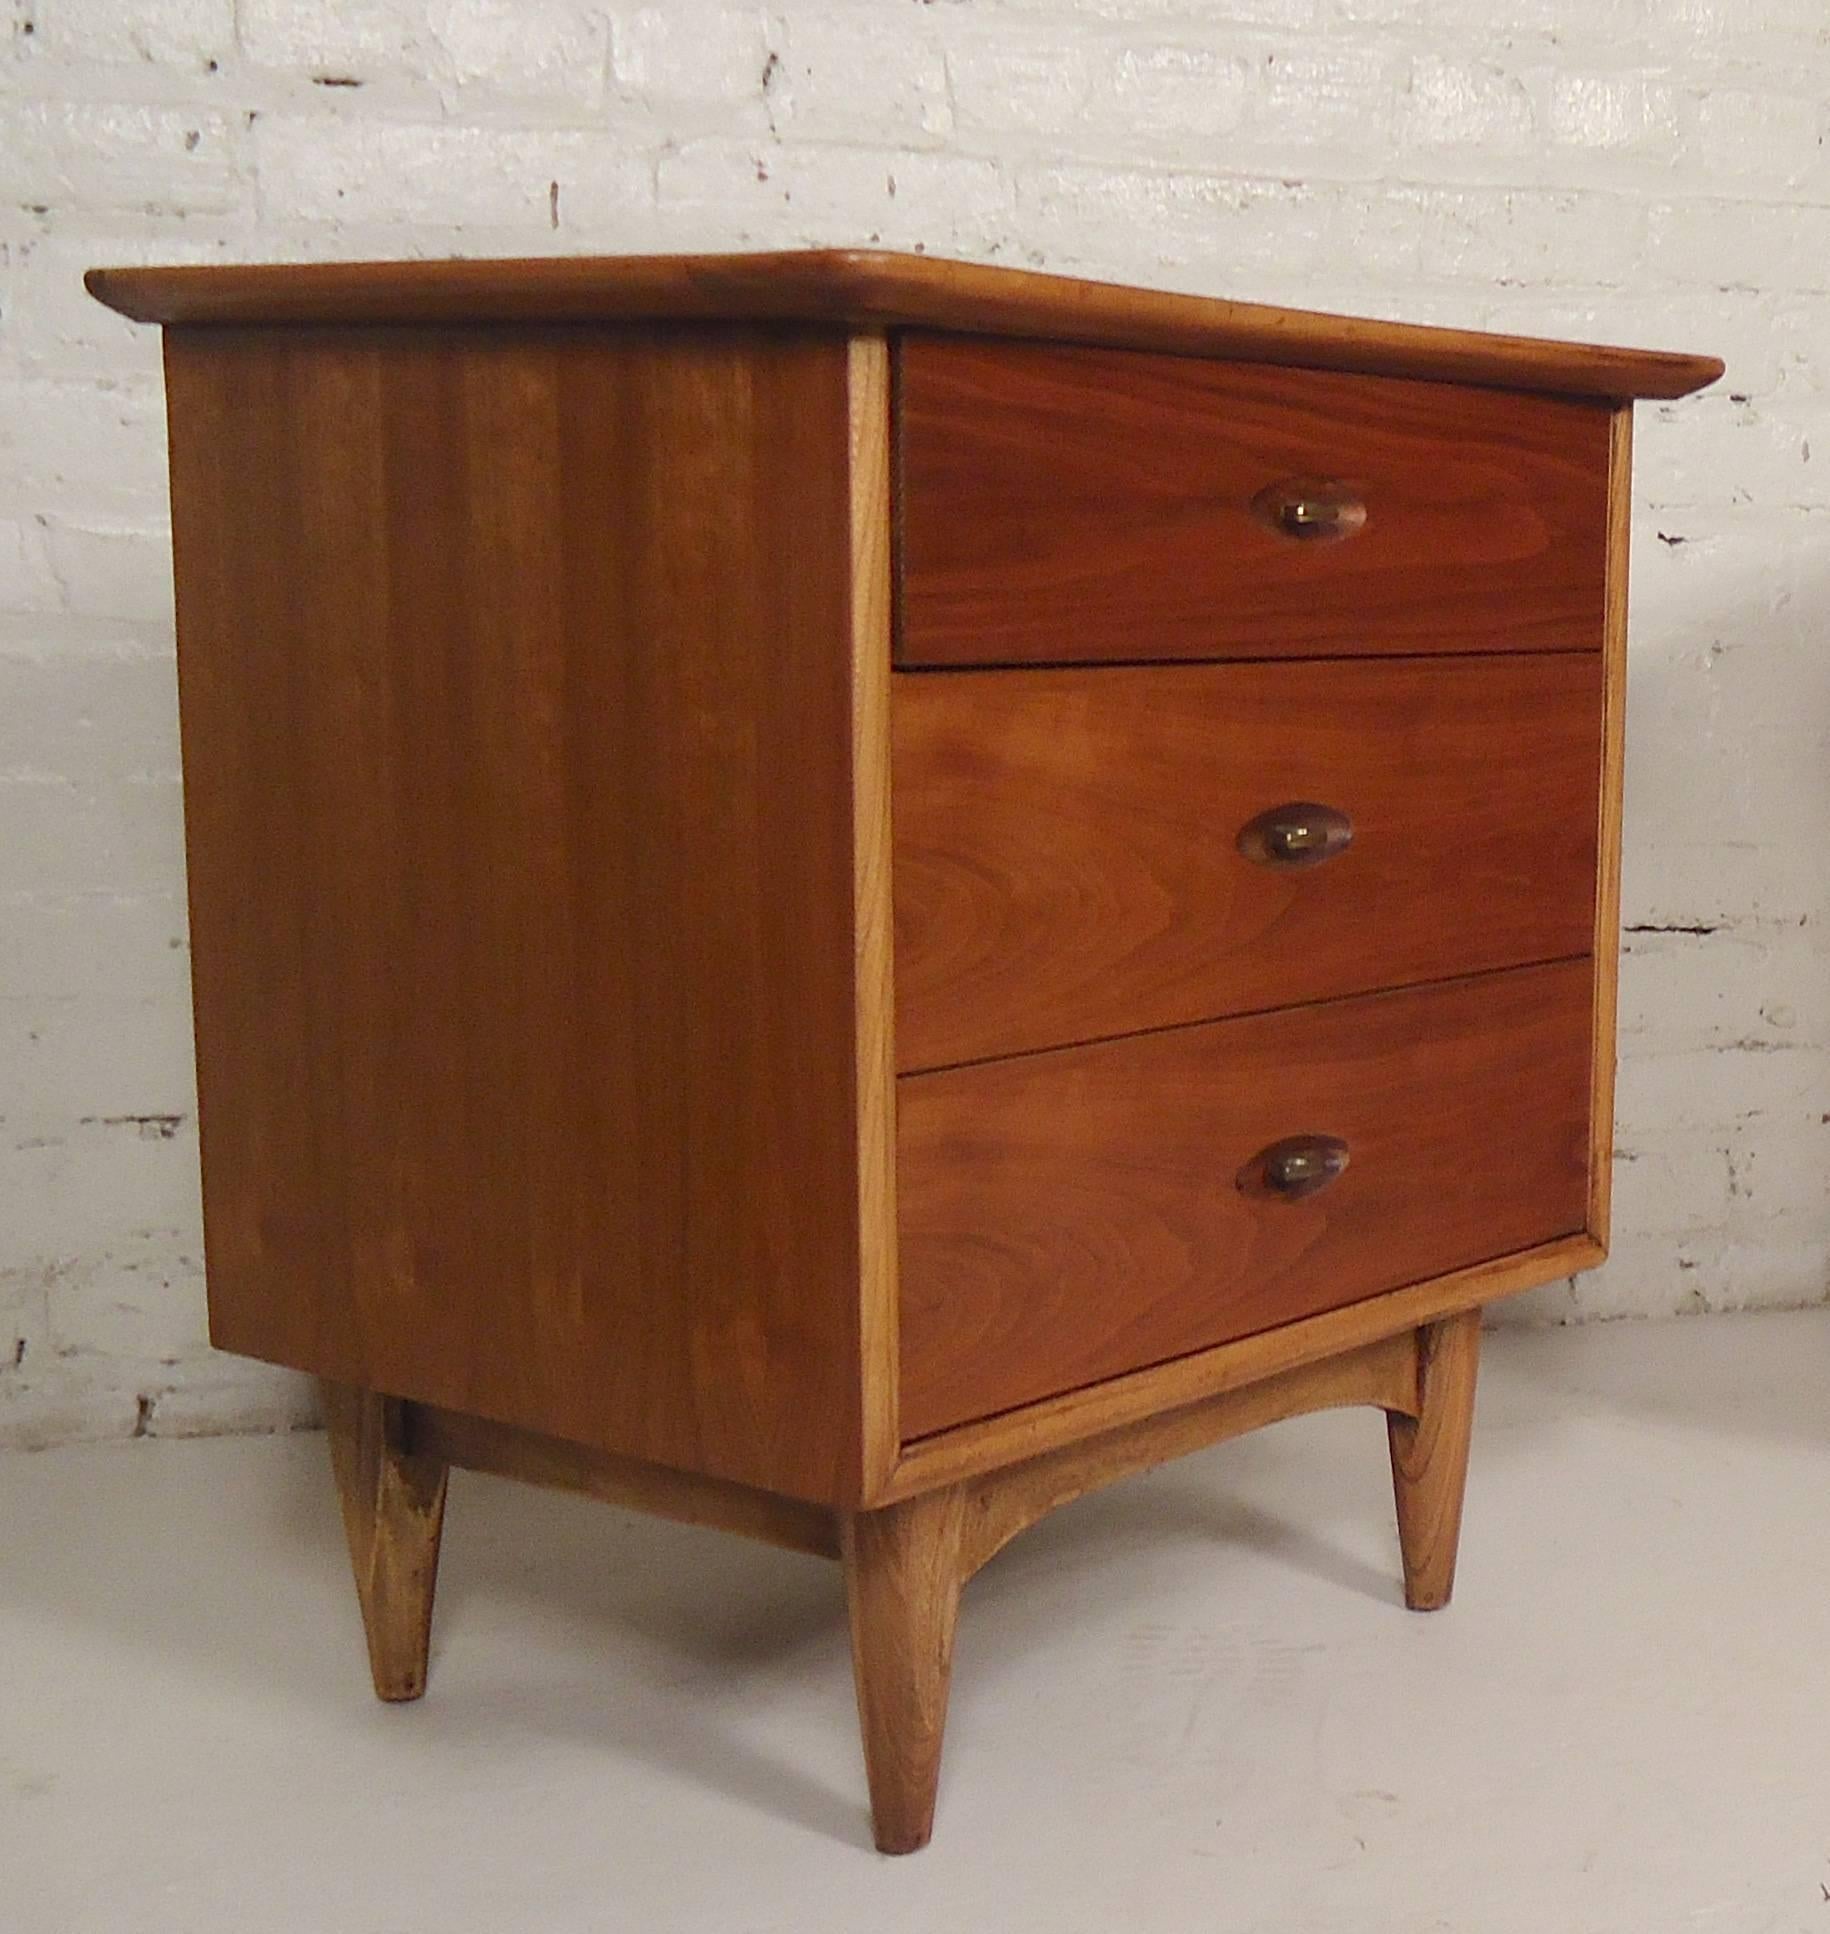 Pair of vintage modern bedside tables with three drawers and unique curved top. Great for bedroom or living room use.

(Please confirm item location - NY or NJ - with dealer).
      